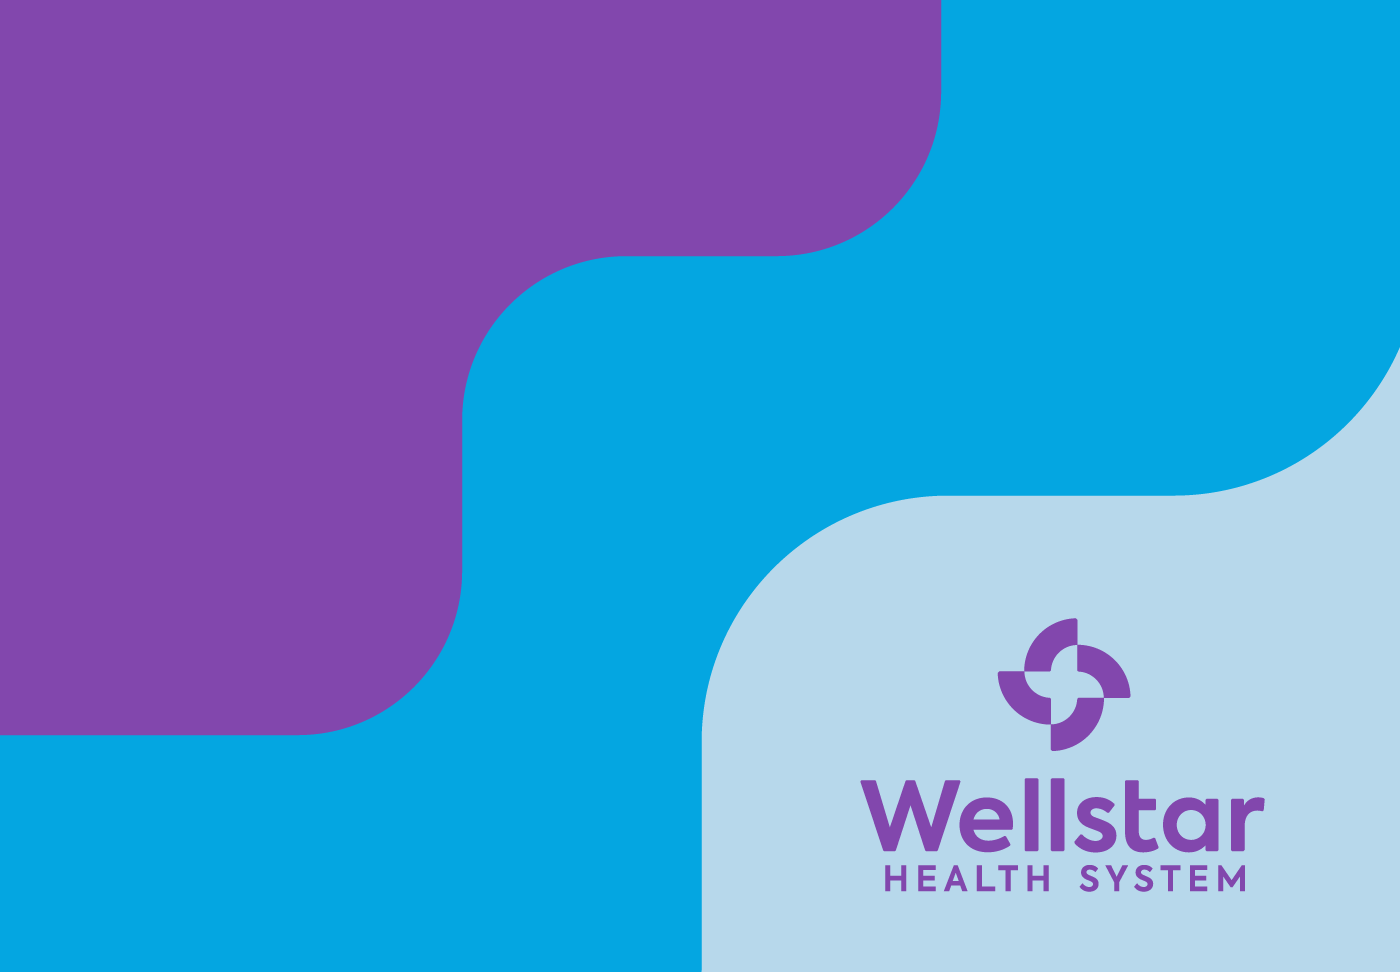 Wellstar Health System Introduces New Healthcare Model at Atlanta Medical Center South Image